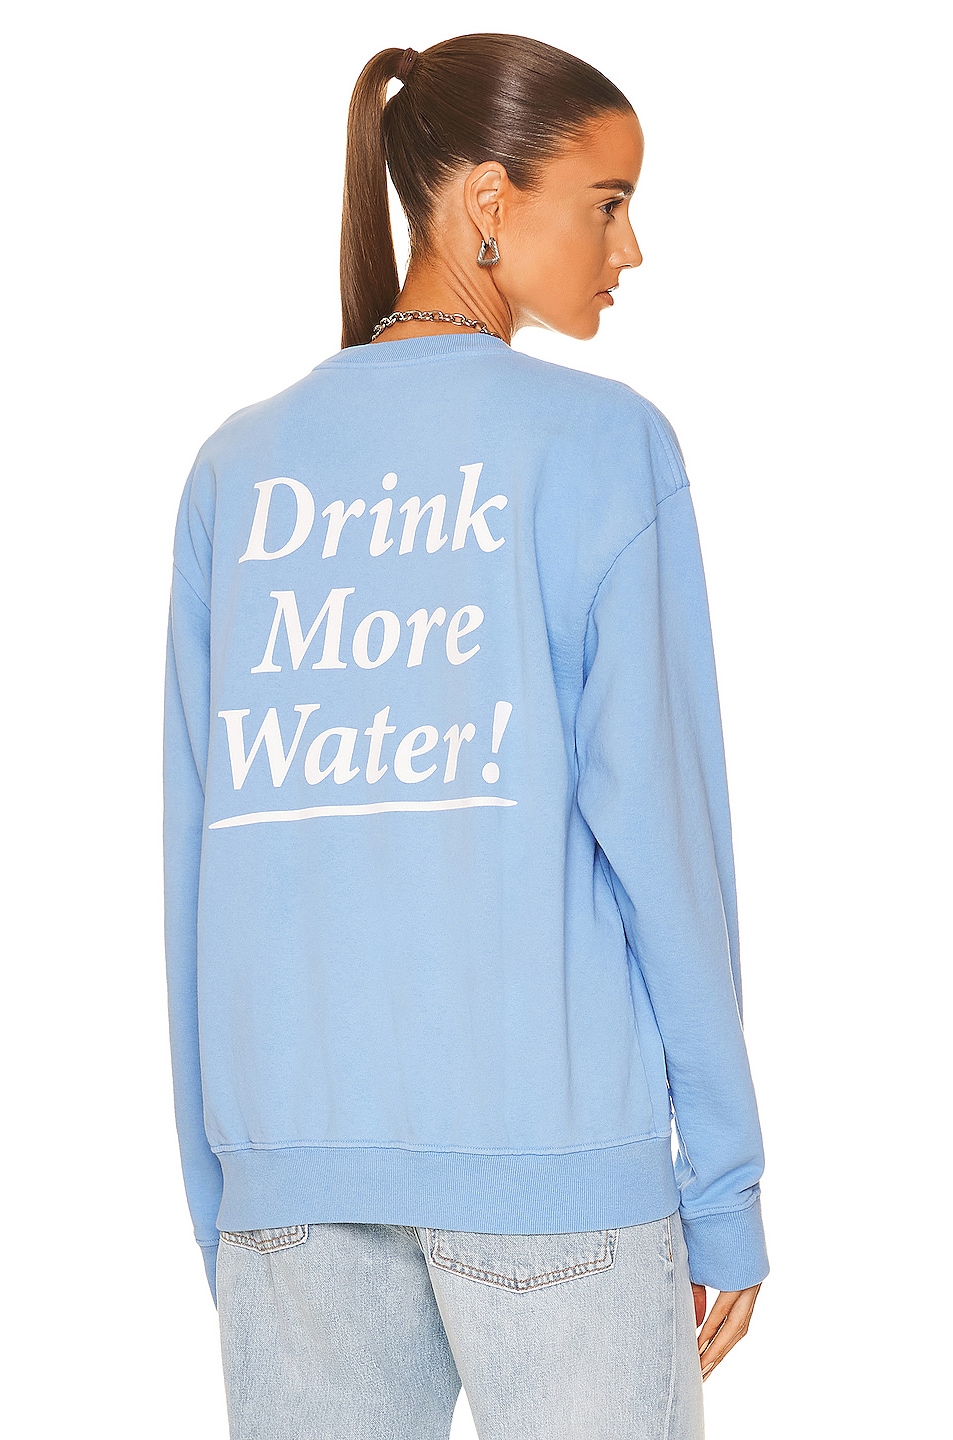 Image 1 of Sporty & Rich Drink More Water Crewneck Sweatshirt in Periwinkle & White